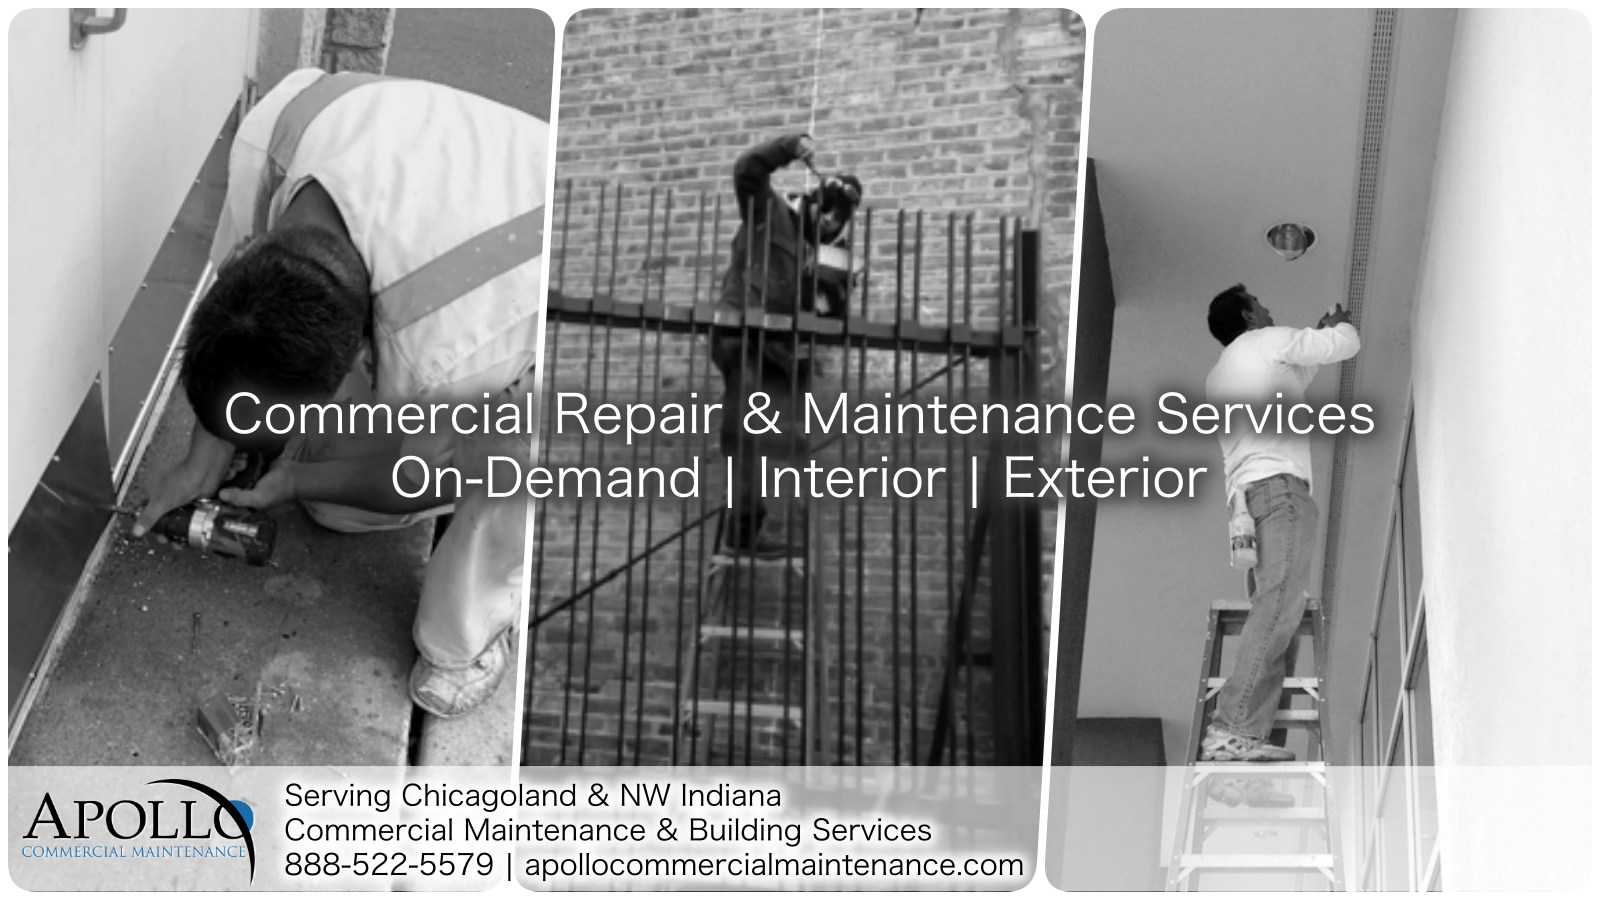 commercial repair and maintenance services on-demand interior | exterior